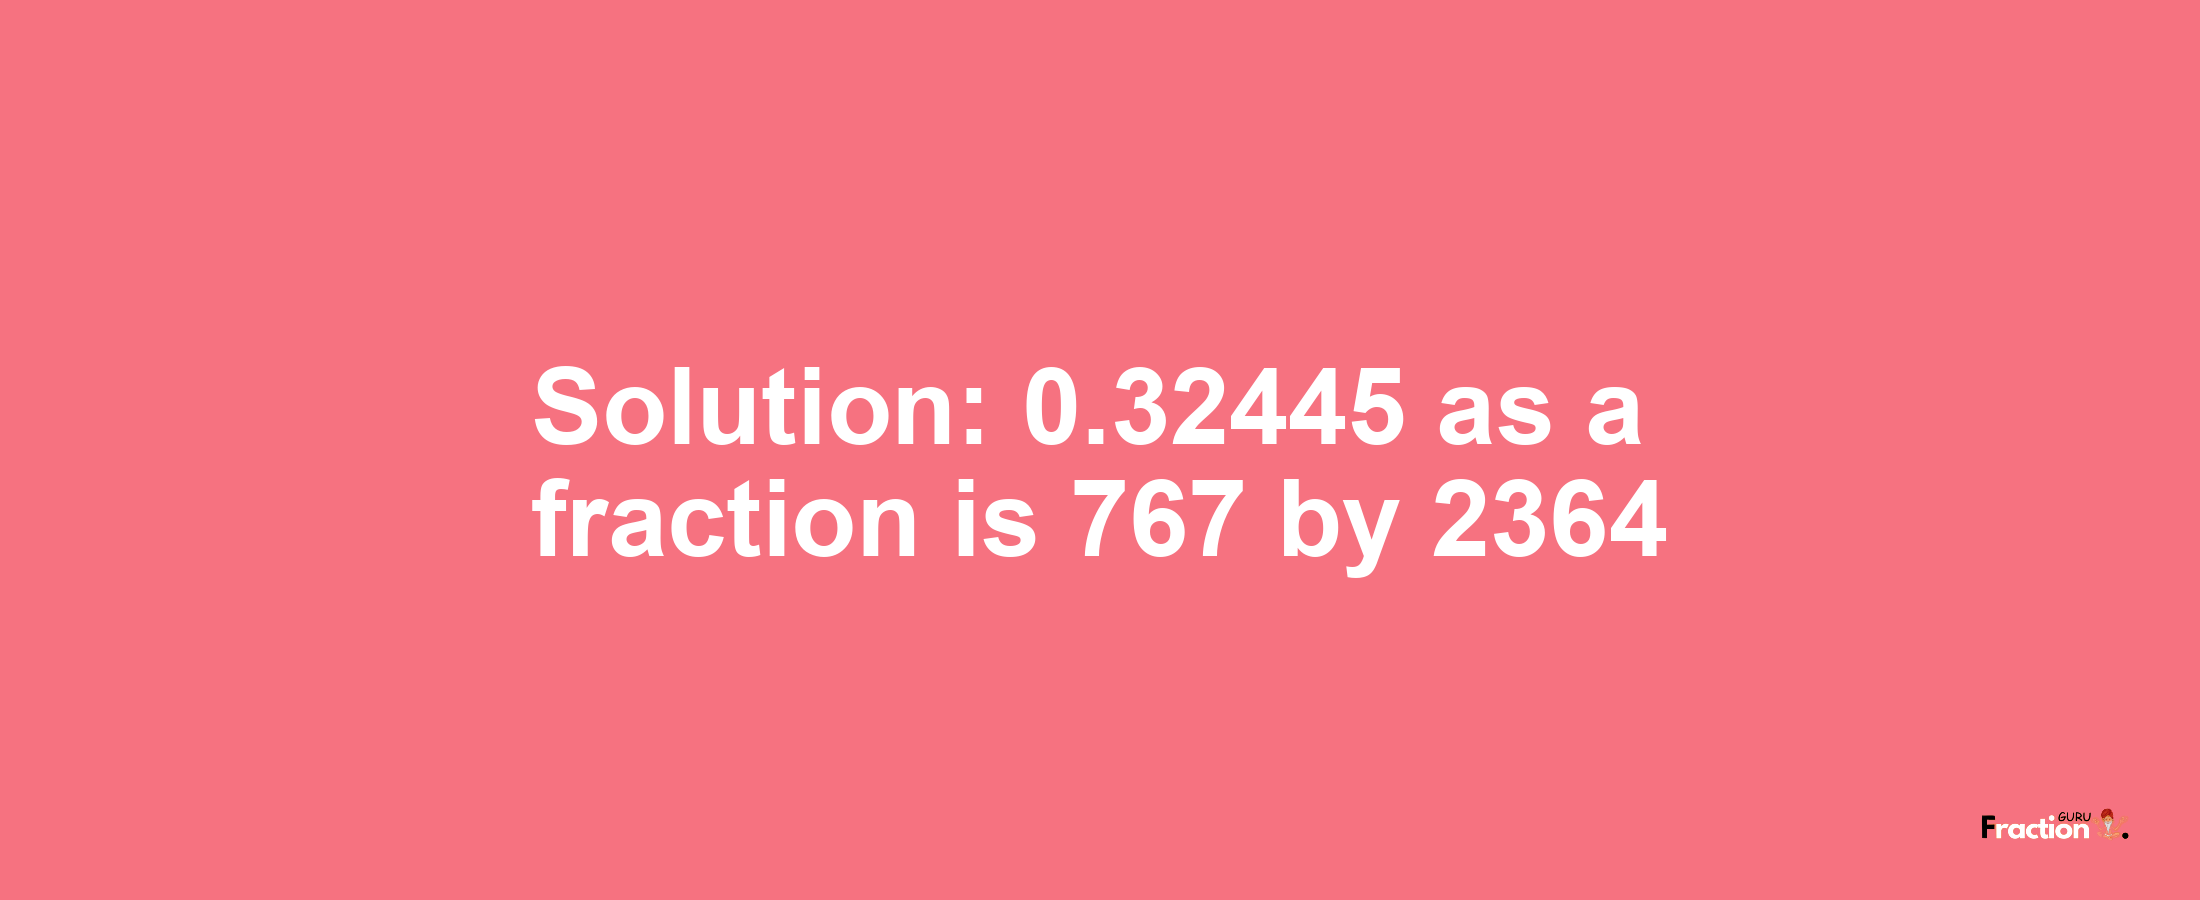 Solution:0.32445 as a fraction is 767/2364